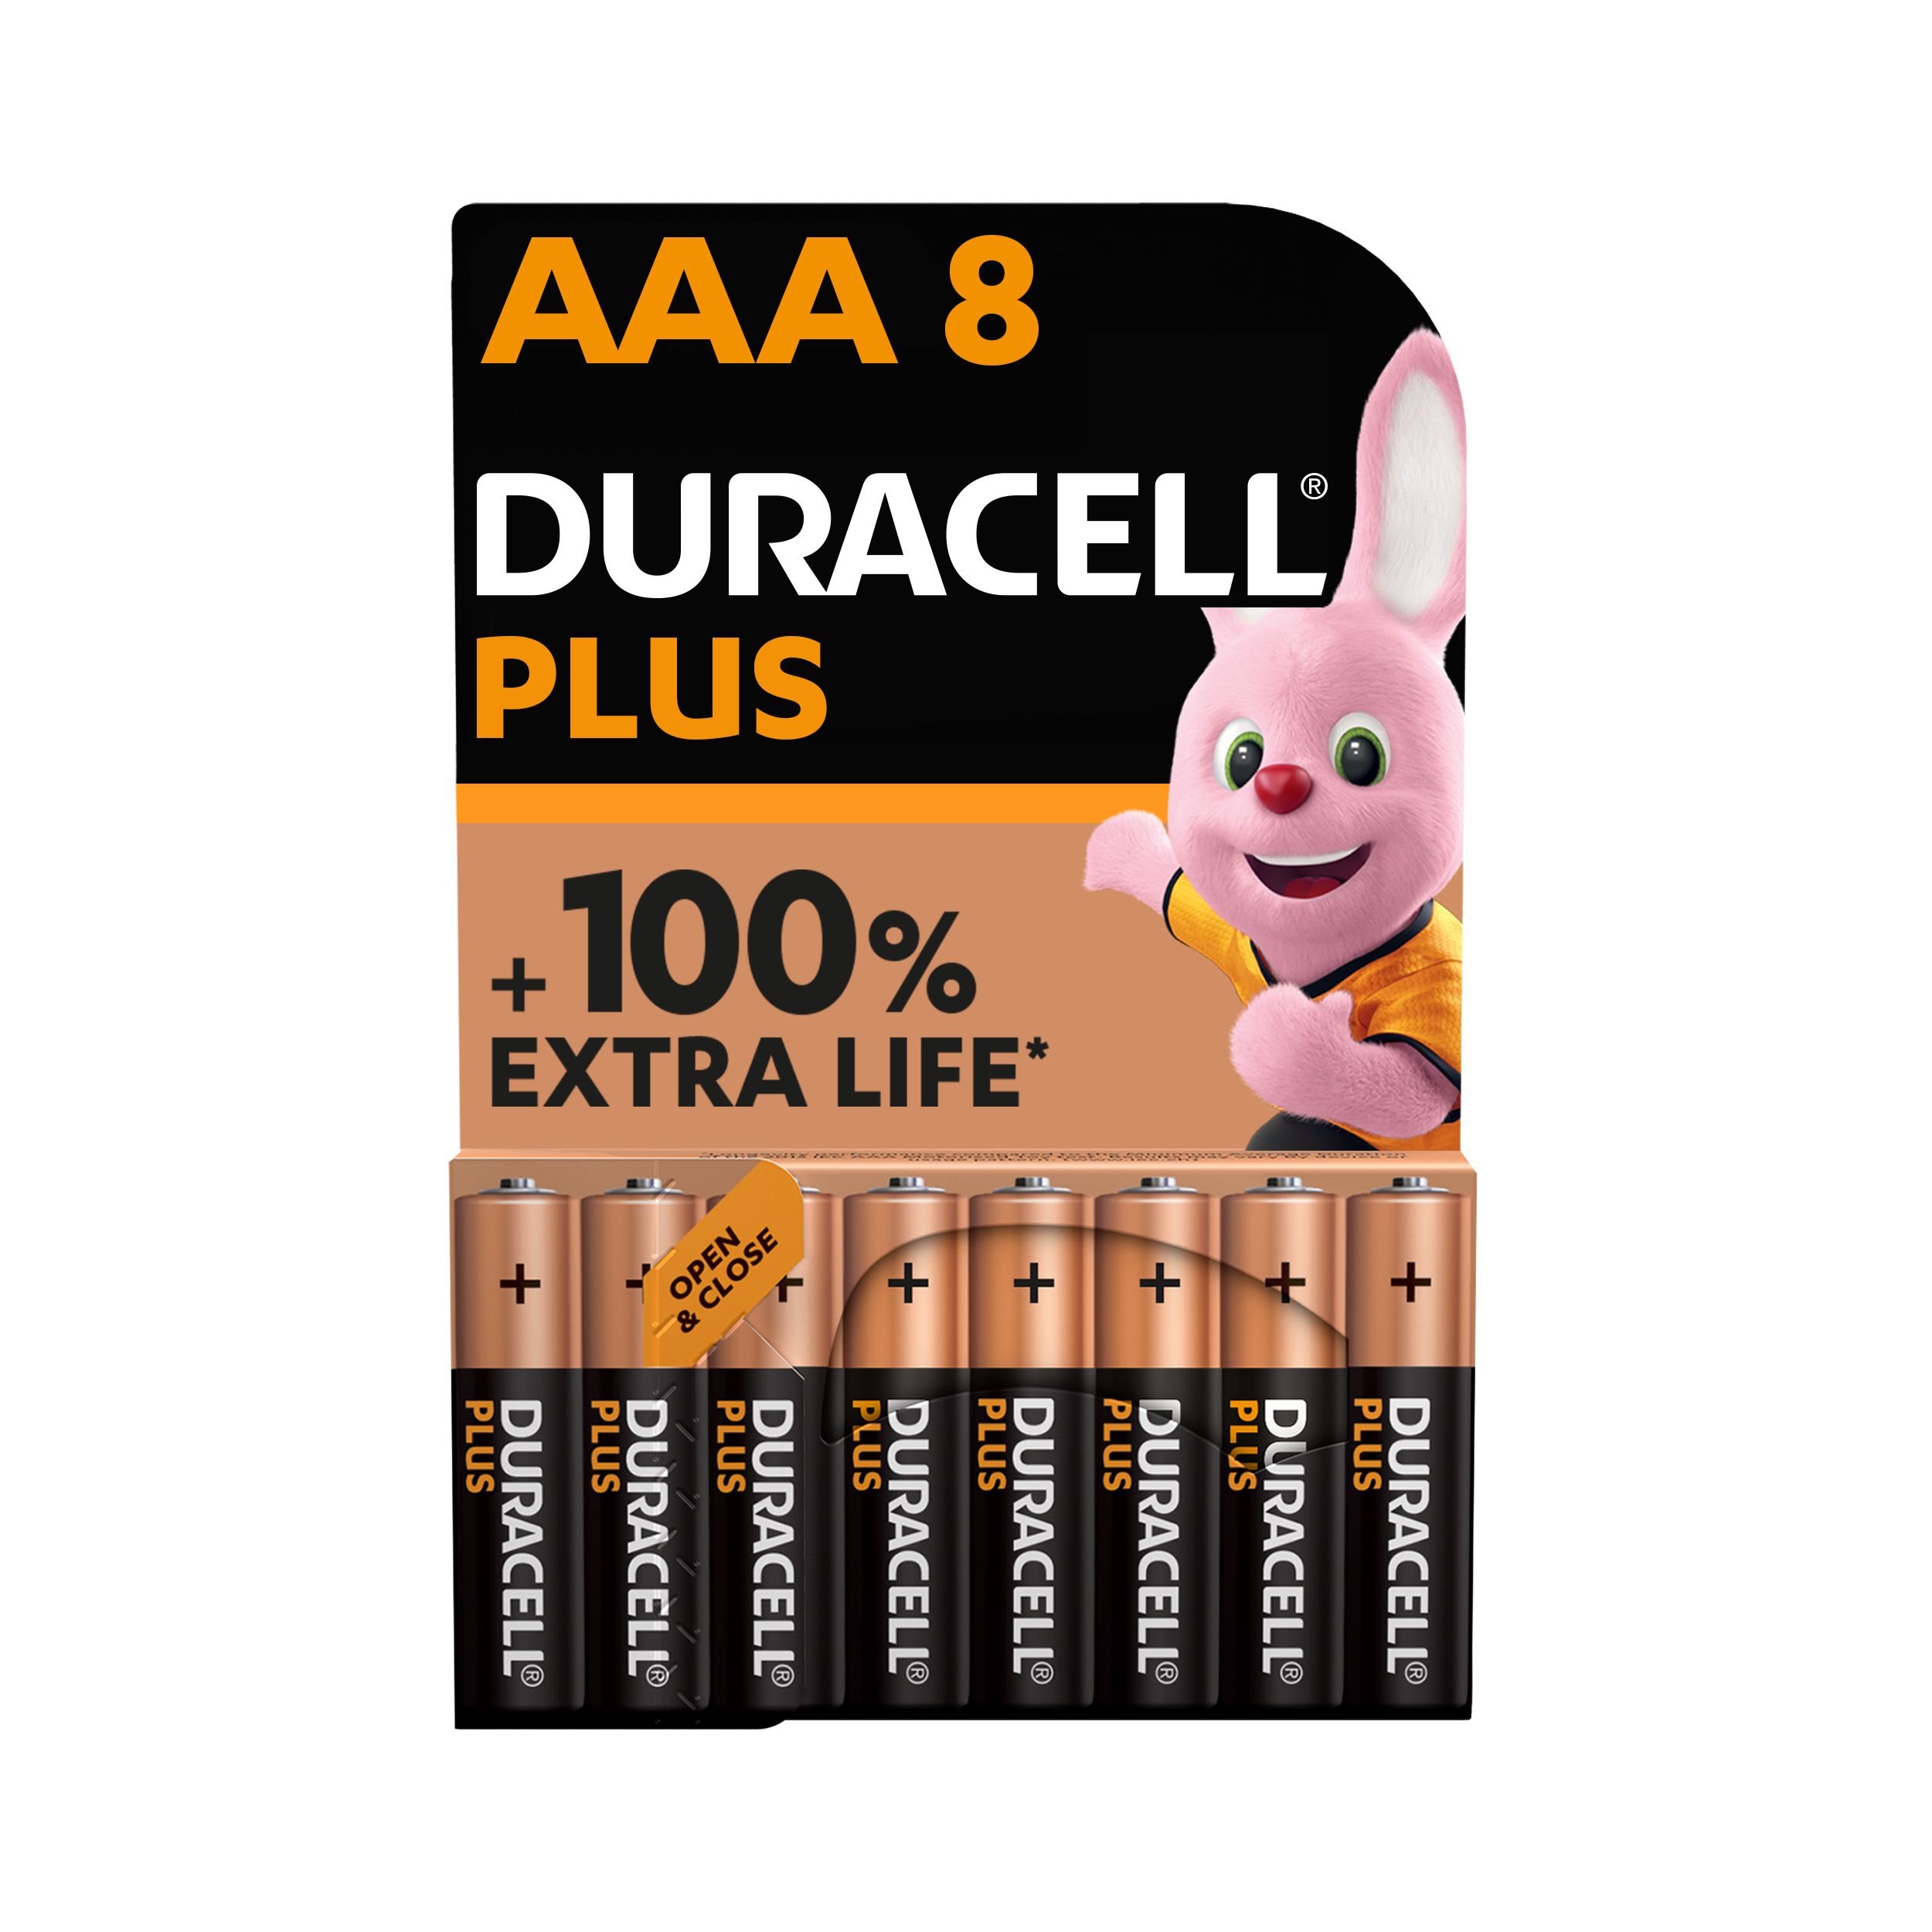 Duracell Plus AAA Battery, Pack of 8